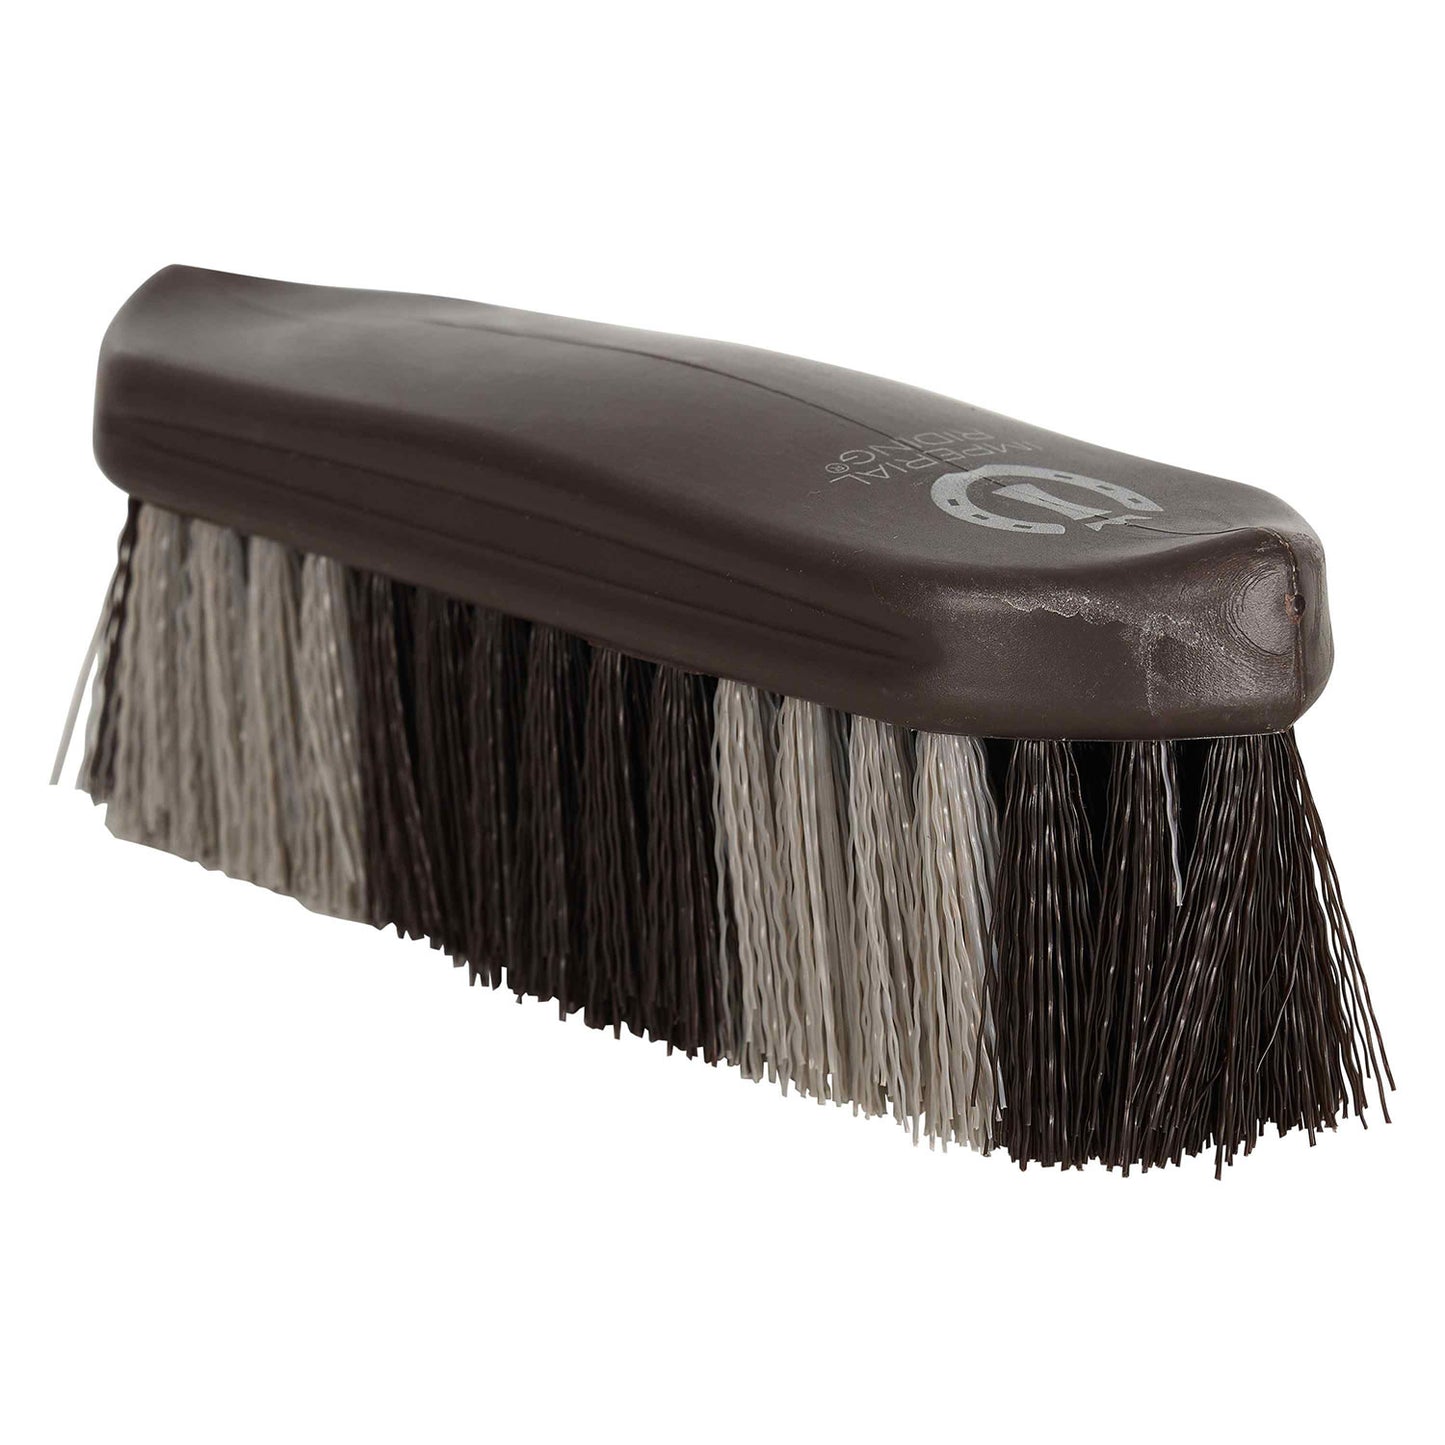 IMPERIAL RIDING DANDY BRUSH HARD TWO-TONE